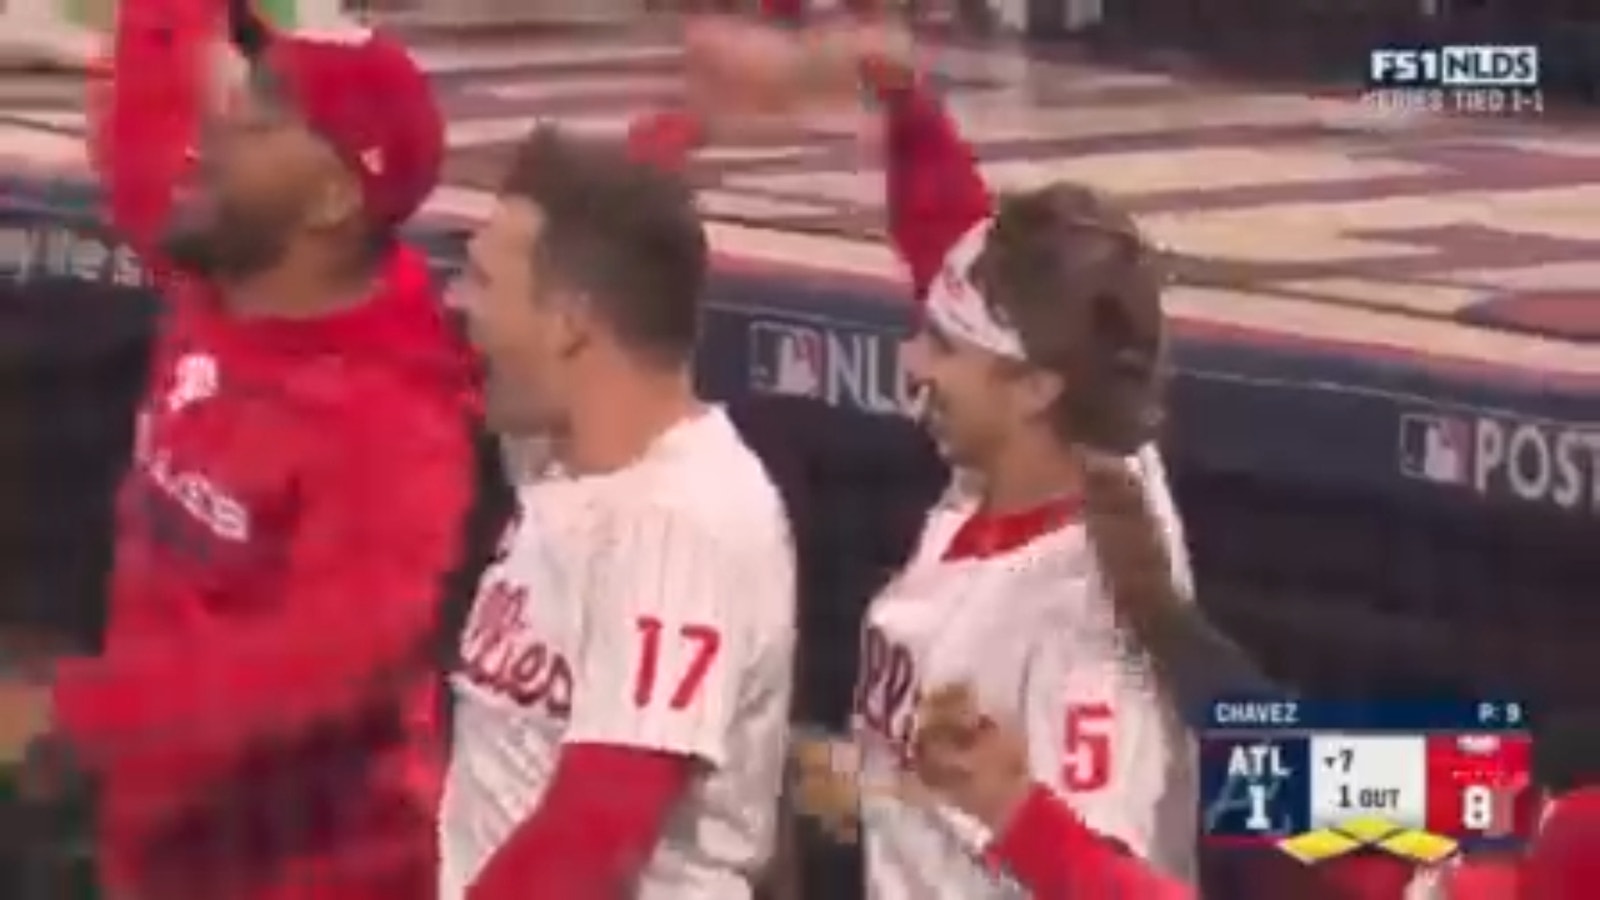 The Phillies jump out to a 9-1 lead after Bryce Harper's RBI